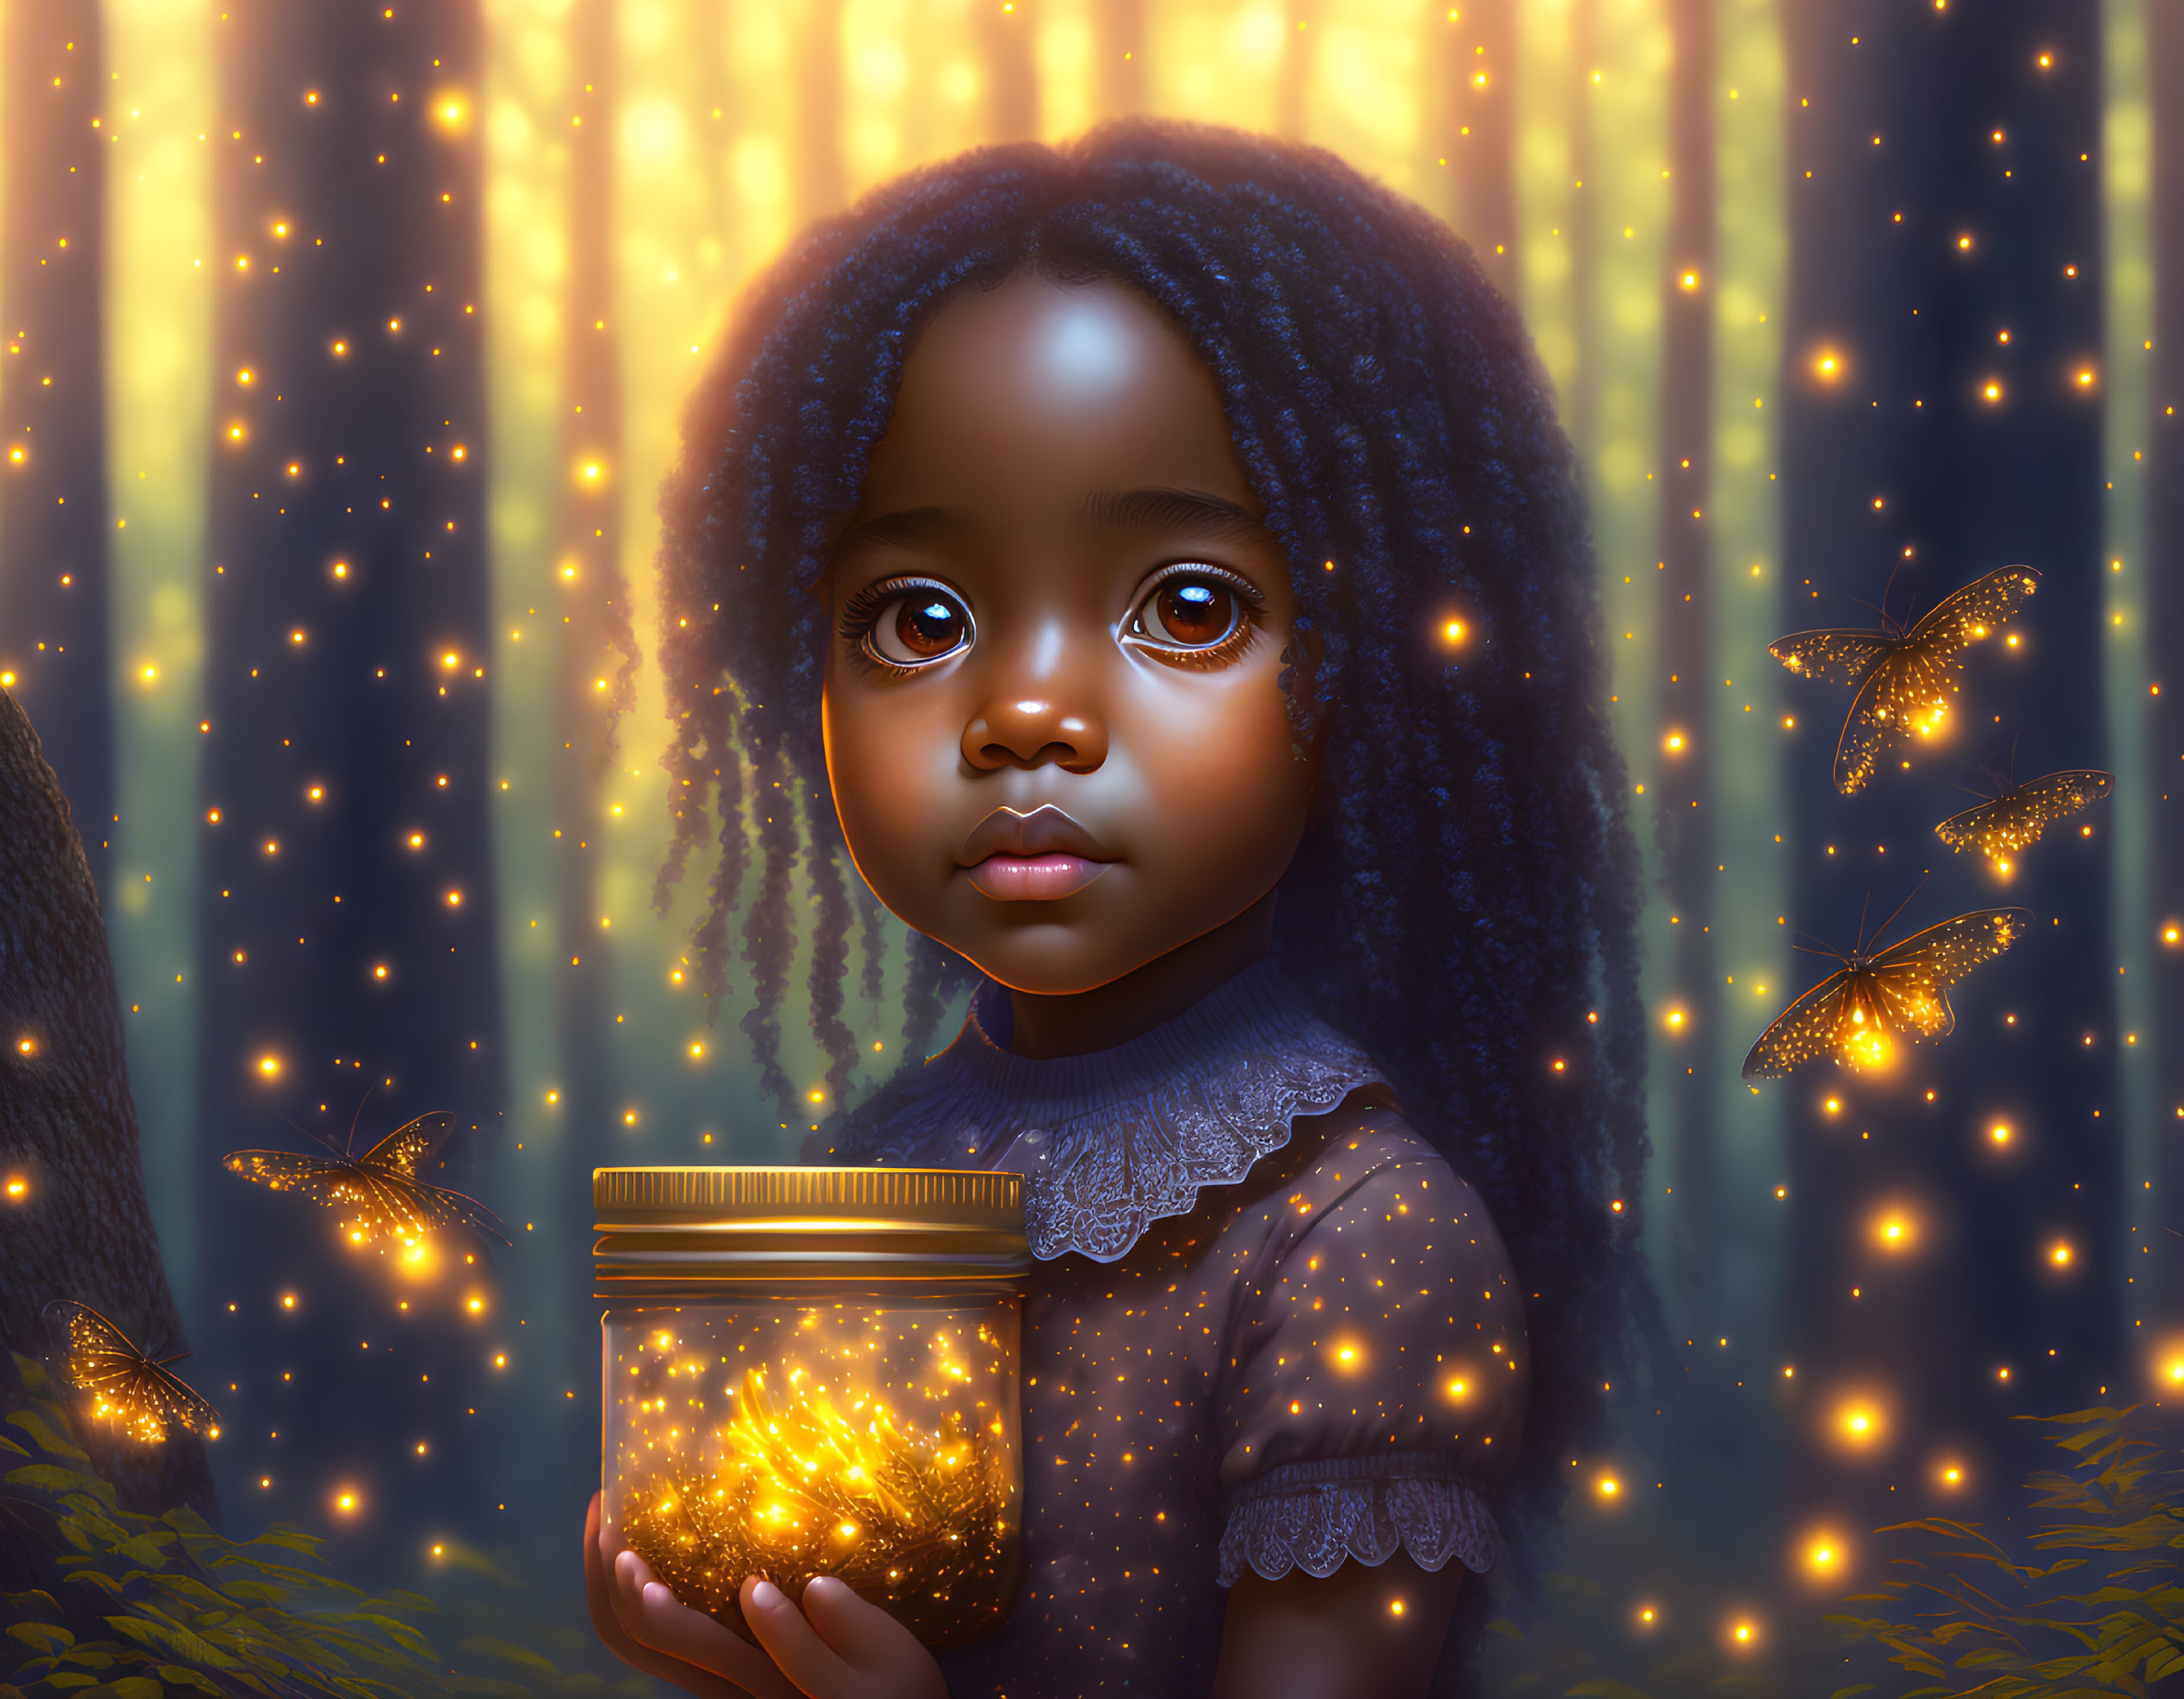 Young girl with big eyes holding a glowing jar in mystical setting.